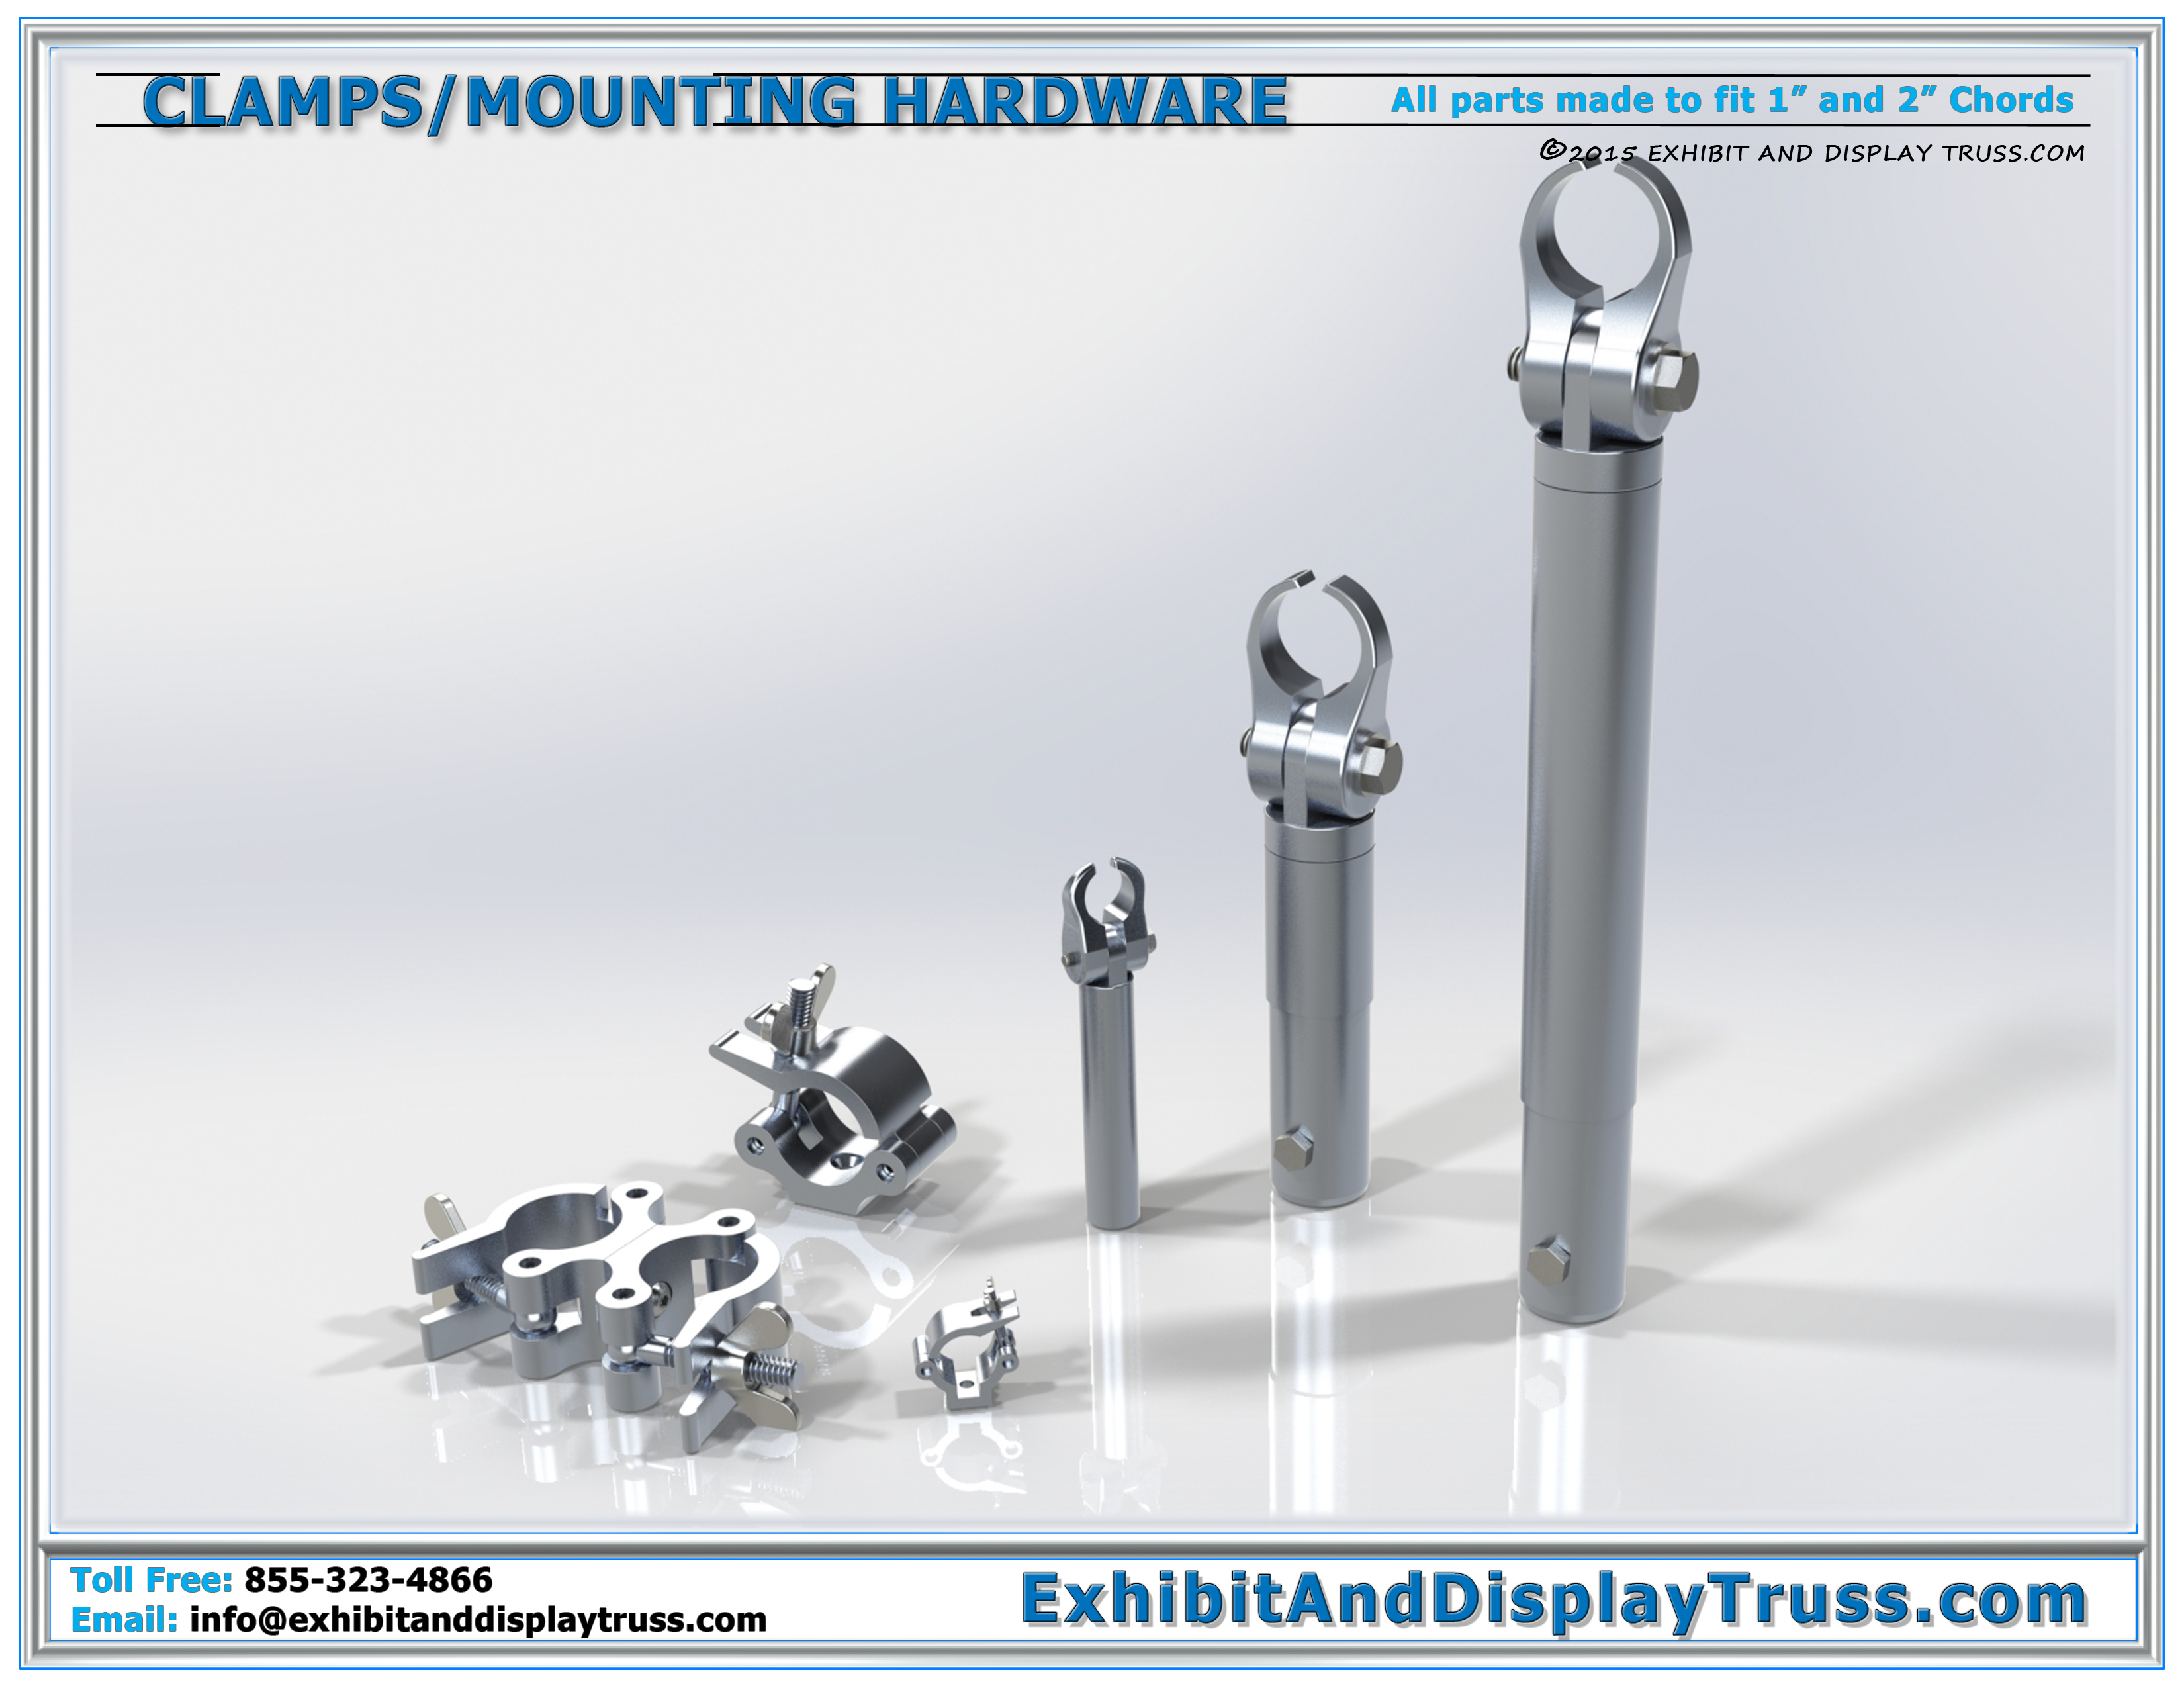 Clamps and Mounting Hardware for Aluminum Truss Exhibition Exhibits and Display Booth Systems